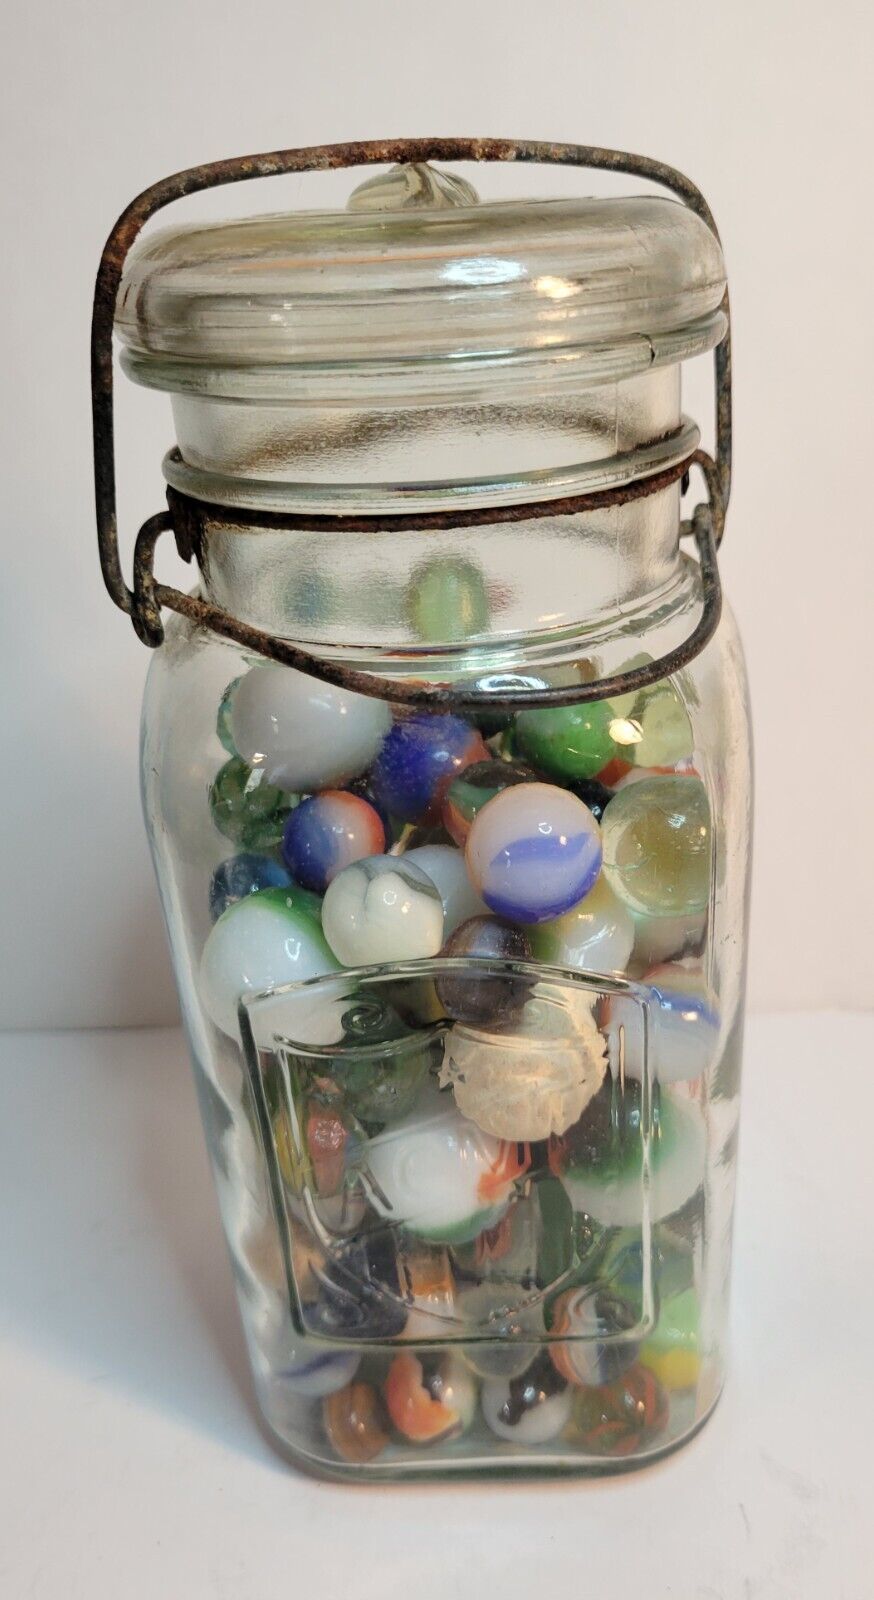 Primary image for Acme 5 Star Shield Square Jar w Lid & Wire Bail Embossed Assortment of Marbles